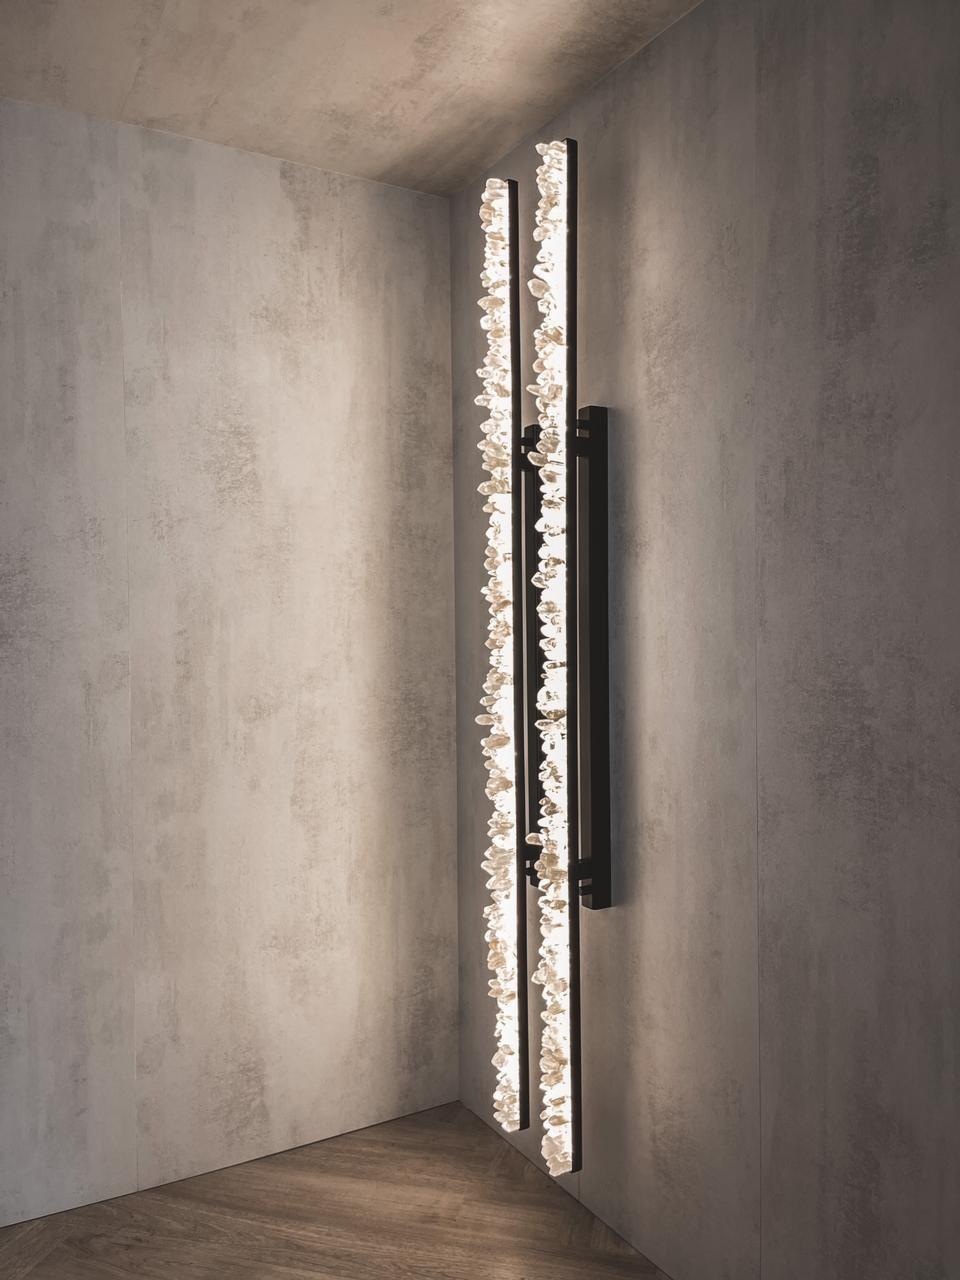 Set of 2 Quartz Wall Light 180 by Aver
Dimensions: W 5 x D 10 x H 180 cm
Materials: White Quartz, metal.
Also available in Smoky Quartz and other metals.

Collection of lamps designed by Waldir Junior for Aver. The collection is featured by its